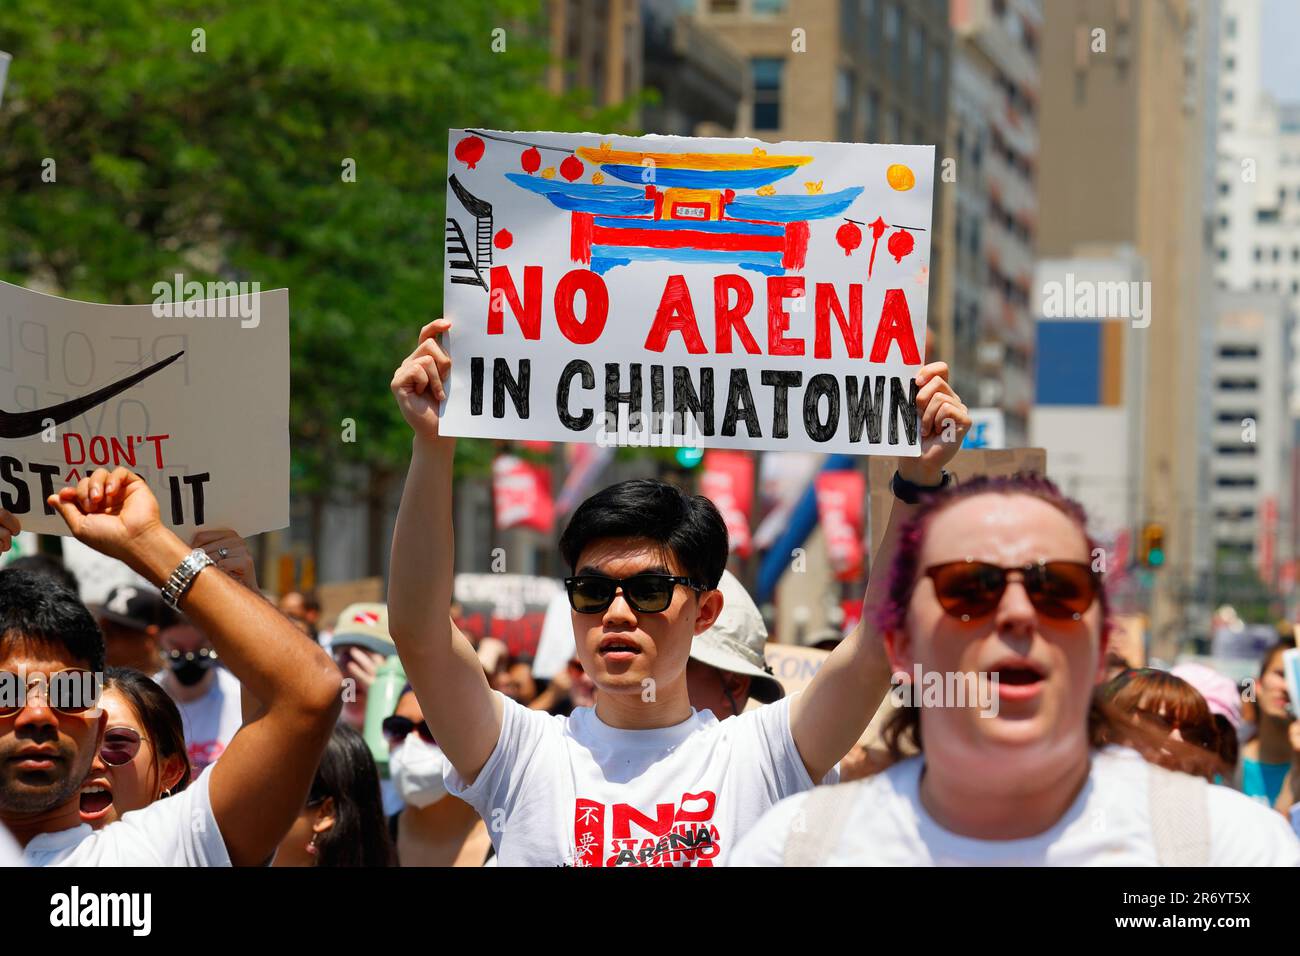 June 10, 2023, Philadelphia. No Arena in Chinatown protest march. A man holds a hand painted sign opposing a stadium (see add'l info). Stock Photo